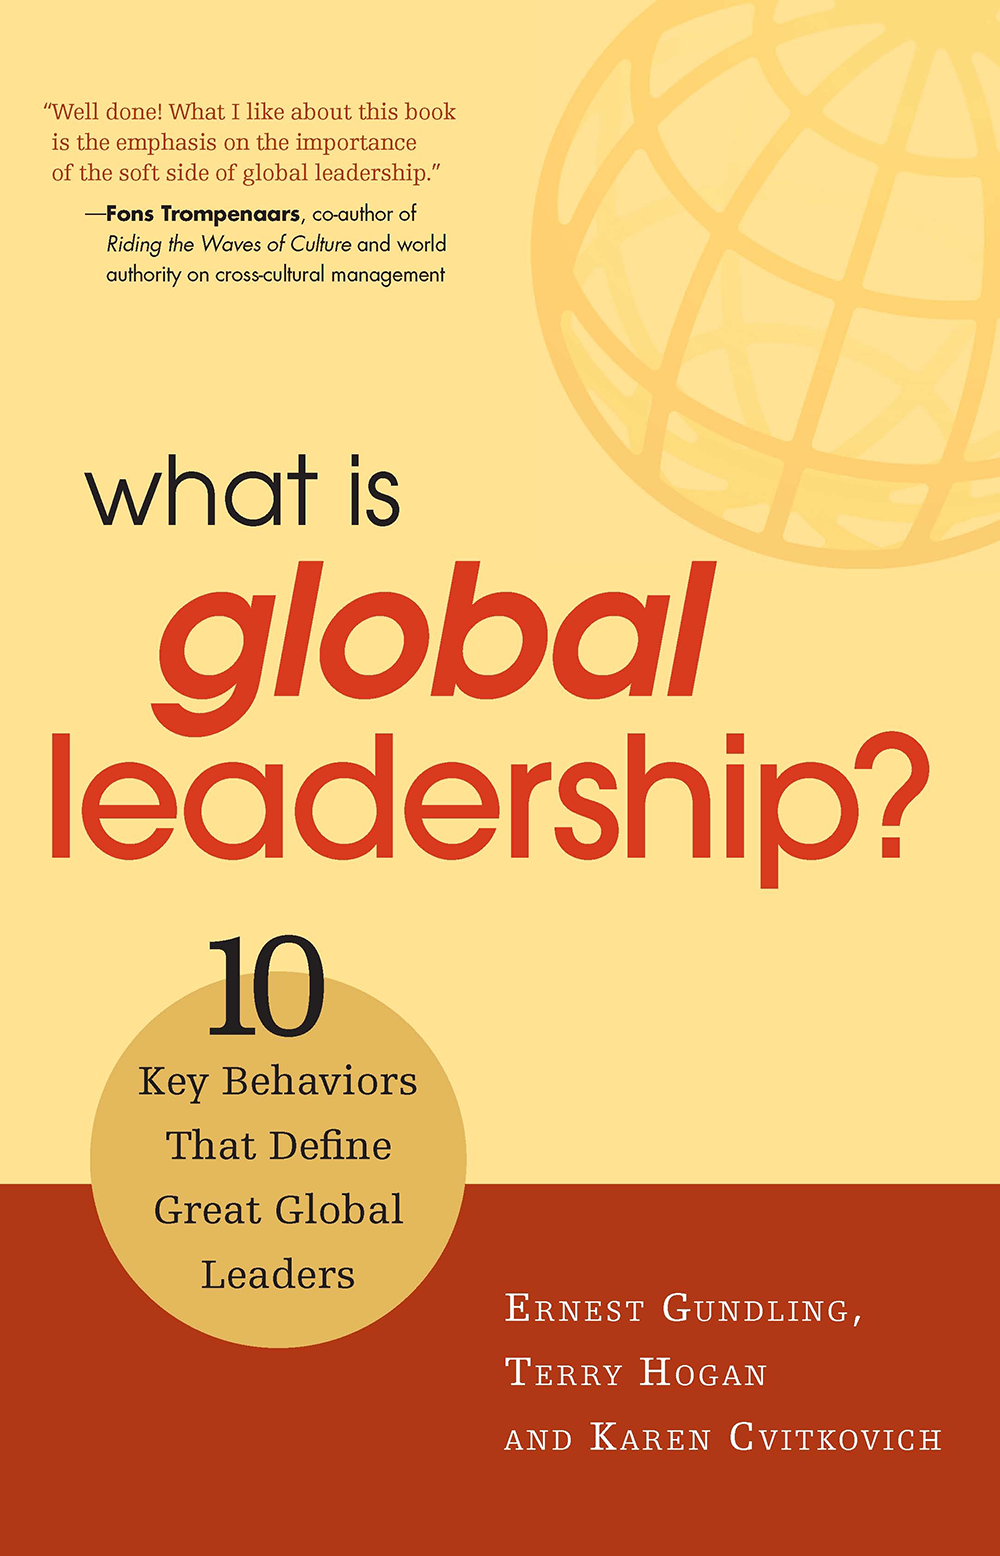 research topics for global leadership